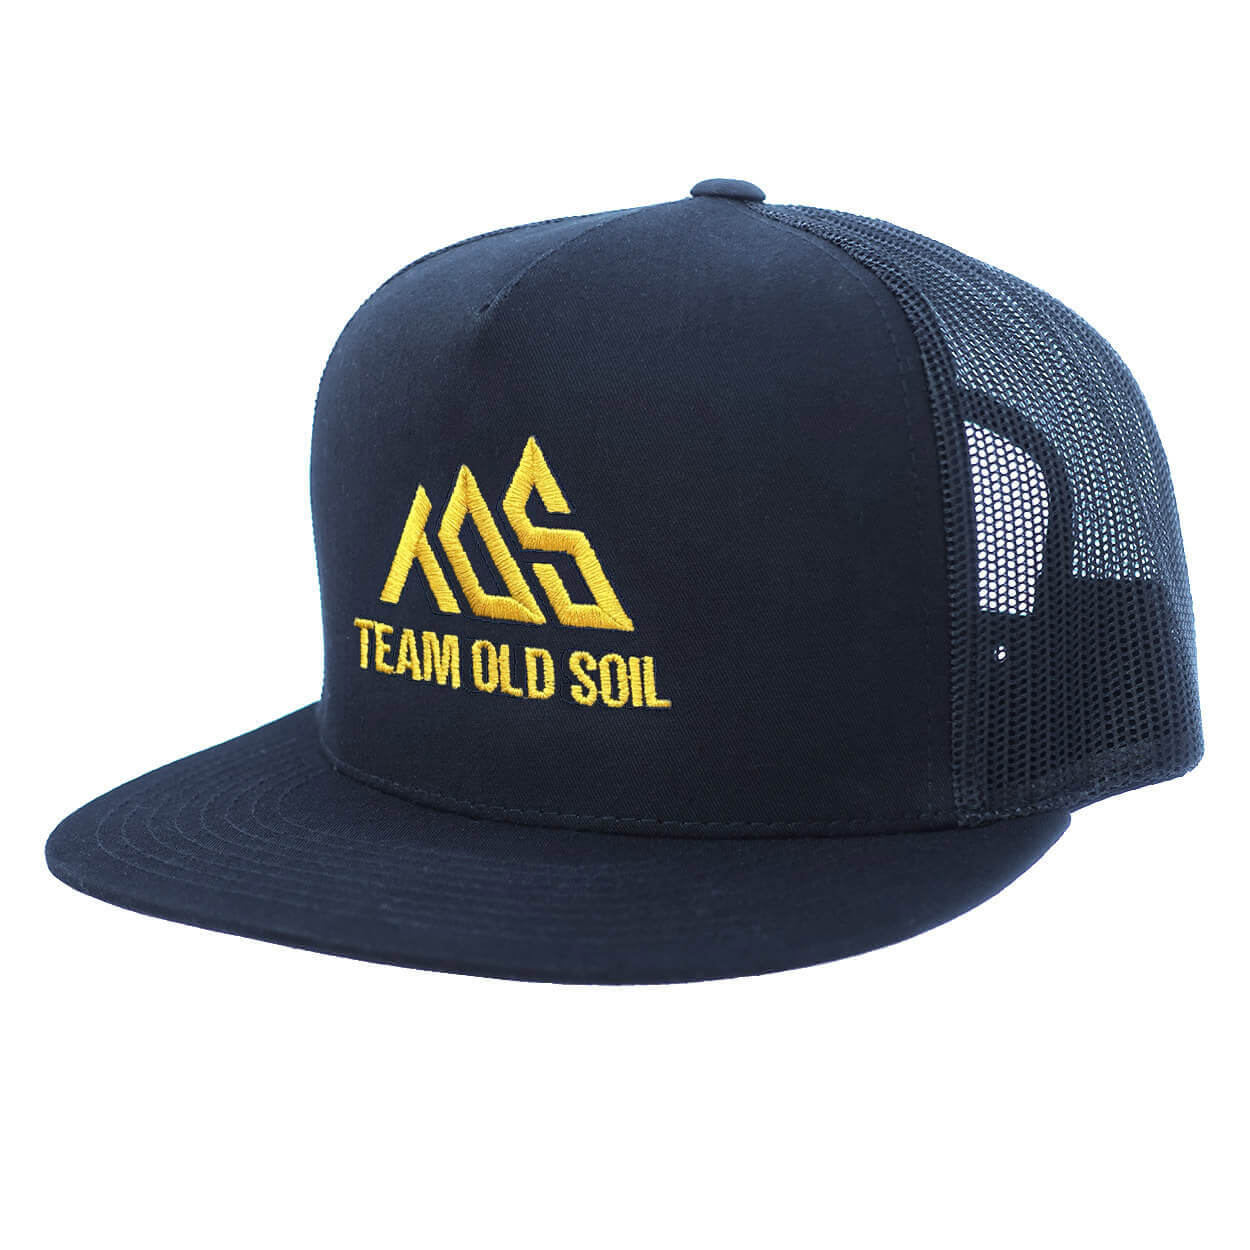 Flat bill snap back embroidered hat black with gold embroidery